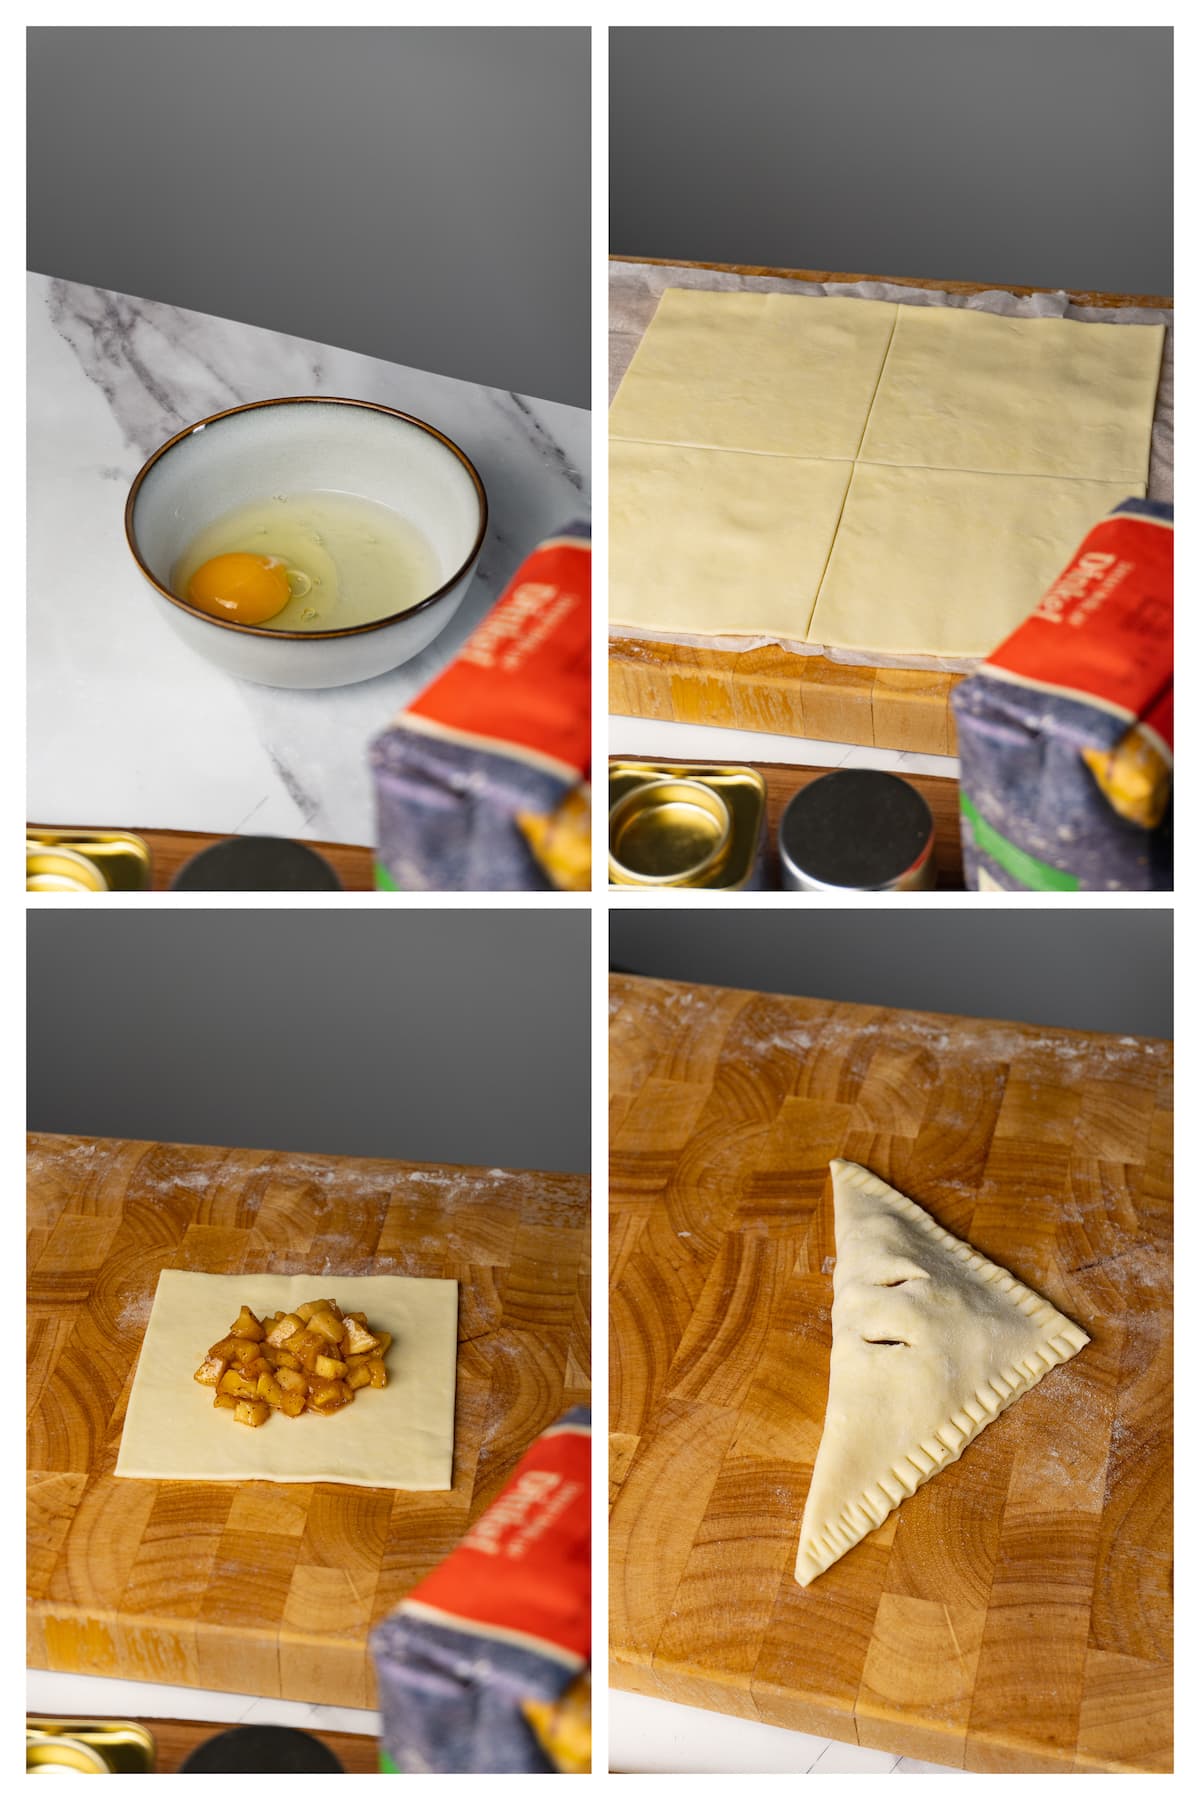 A collage image shows how to assemble apple turnovers in four steps.